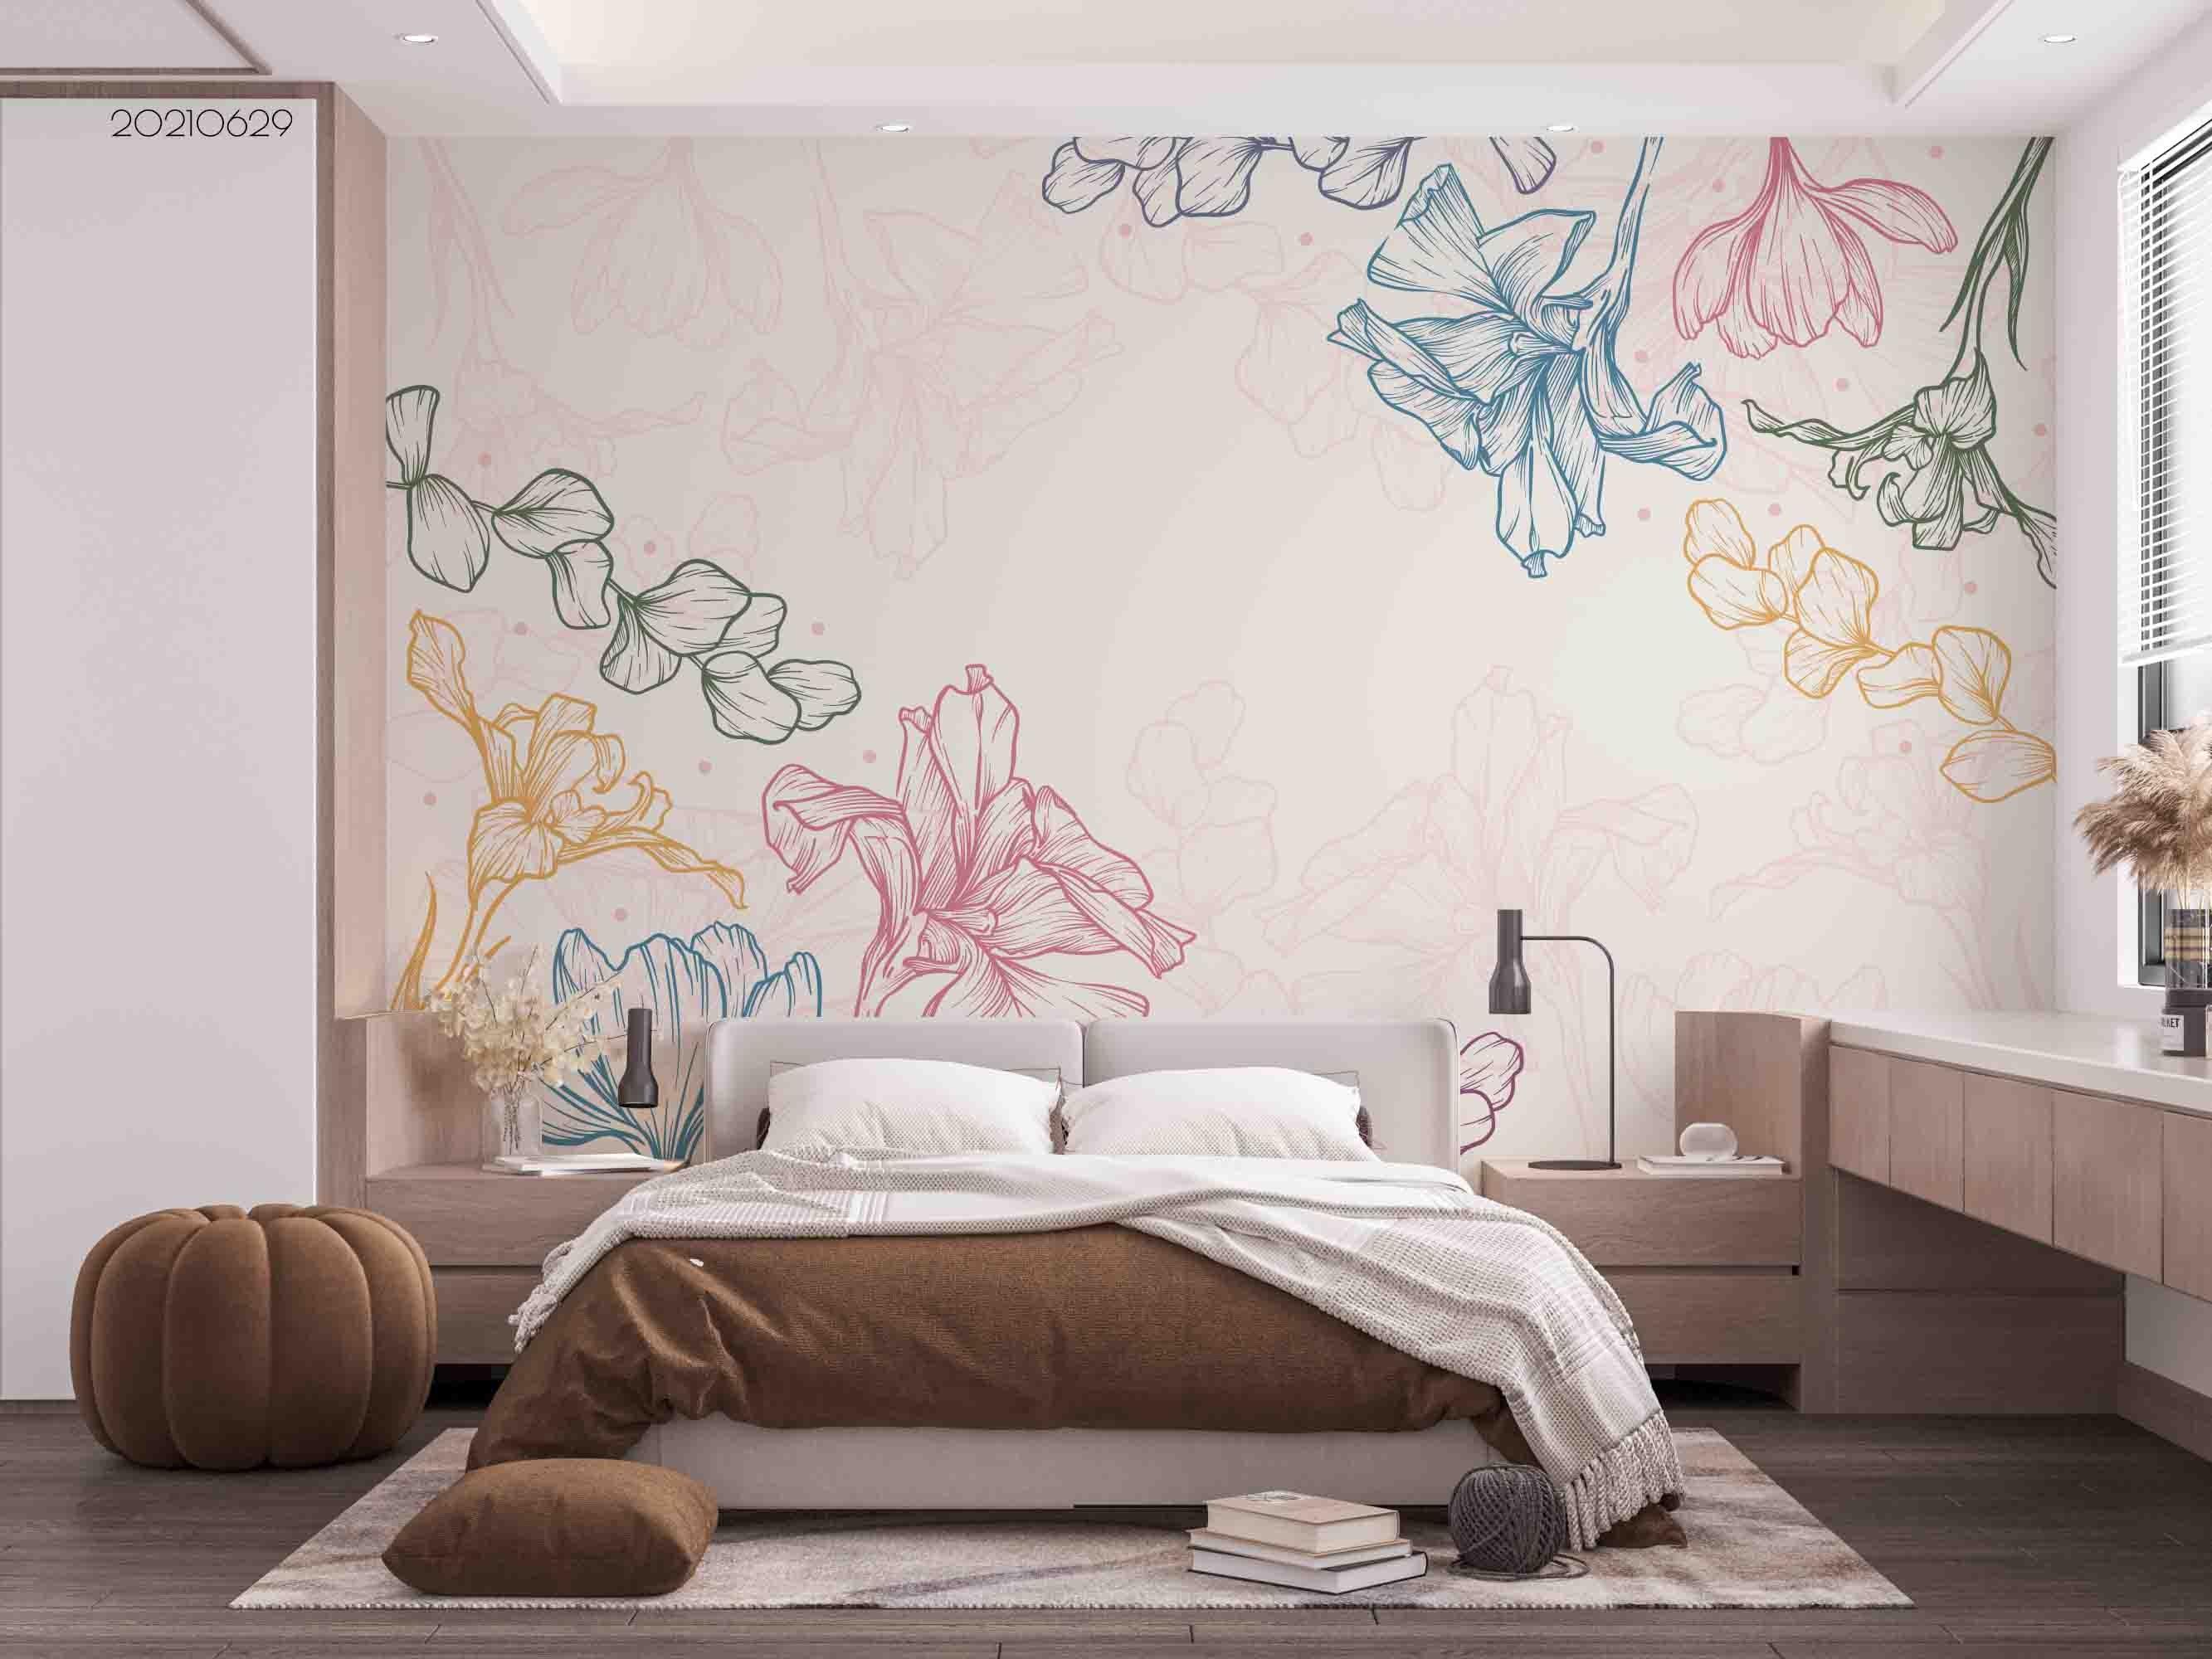 3D Hand Drawn Colorful Floral Wall Mural Wallpaper LQH 25- Jess Art Decoration